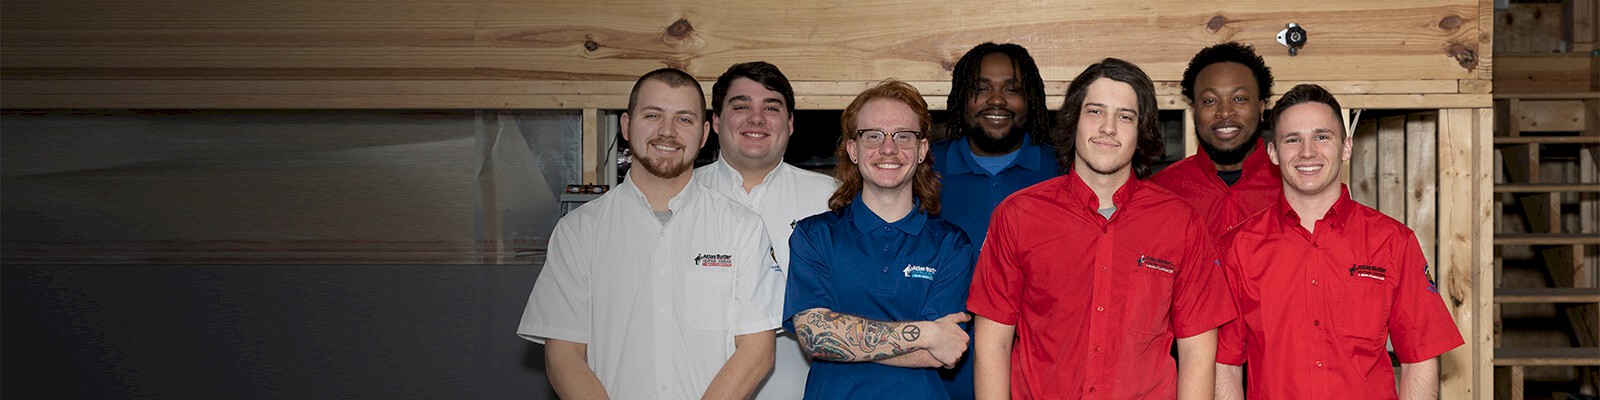 Join Ride to Decide to learn more about a career in plumbing & HVAC